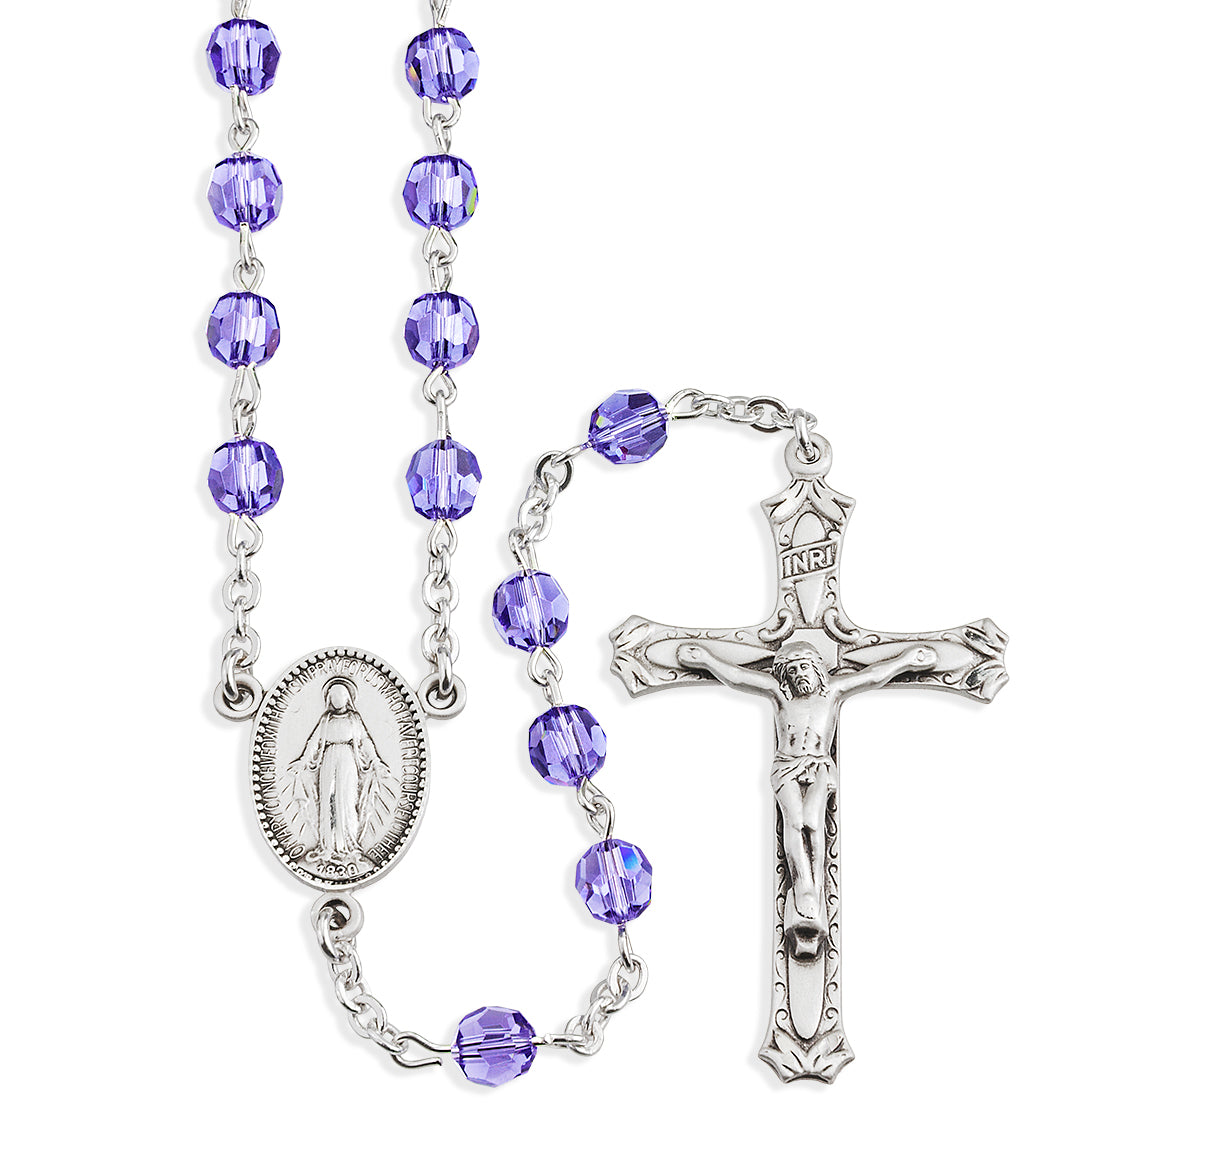 Sterling Silver Rosary Hand Made with Swarovski Crystal 6mm Tanzanite Faceted Round Beads by HMH